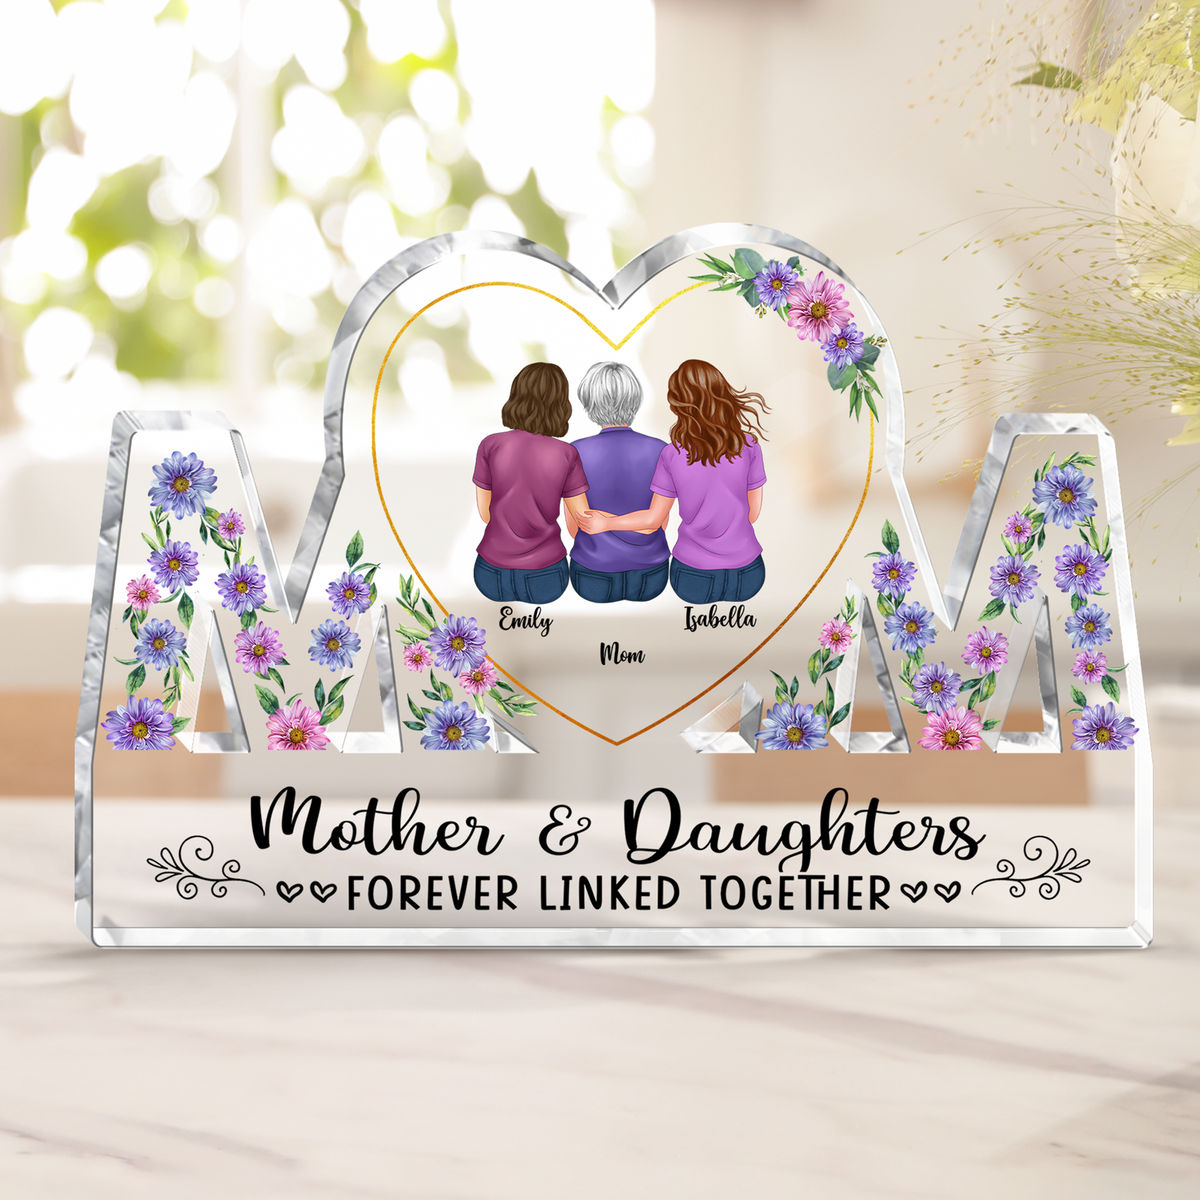 Gifts for Mom - Mother and Daughters forever linked together - Mother's Day Gifts, Birthday Gifts for Mom